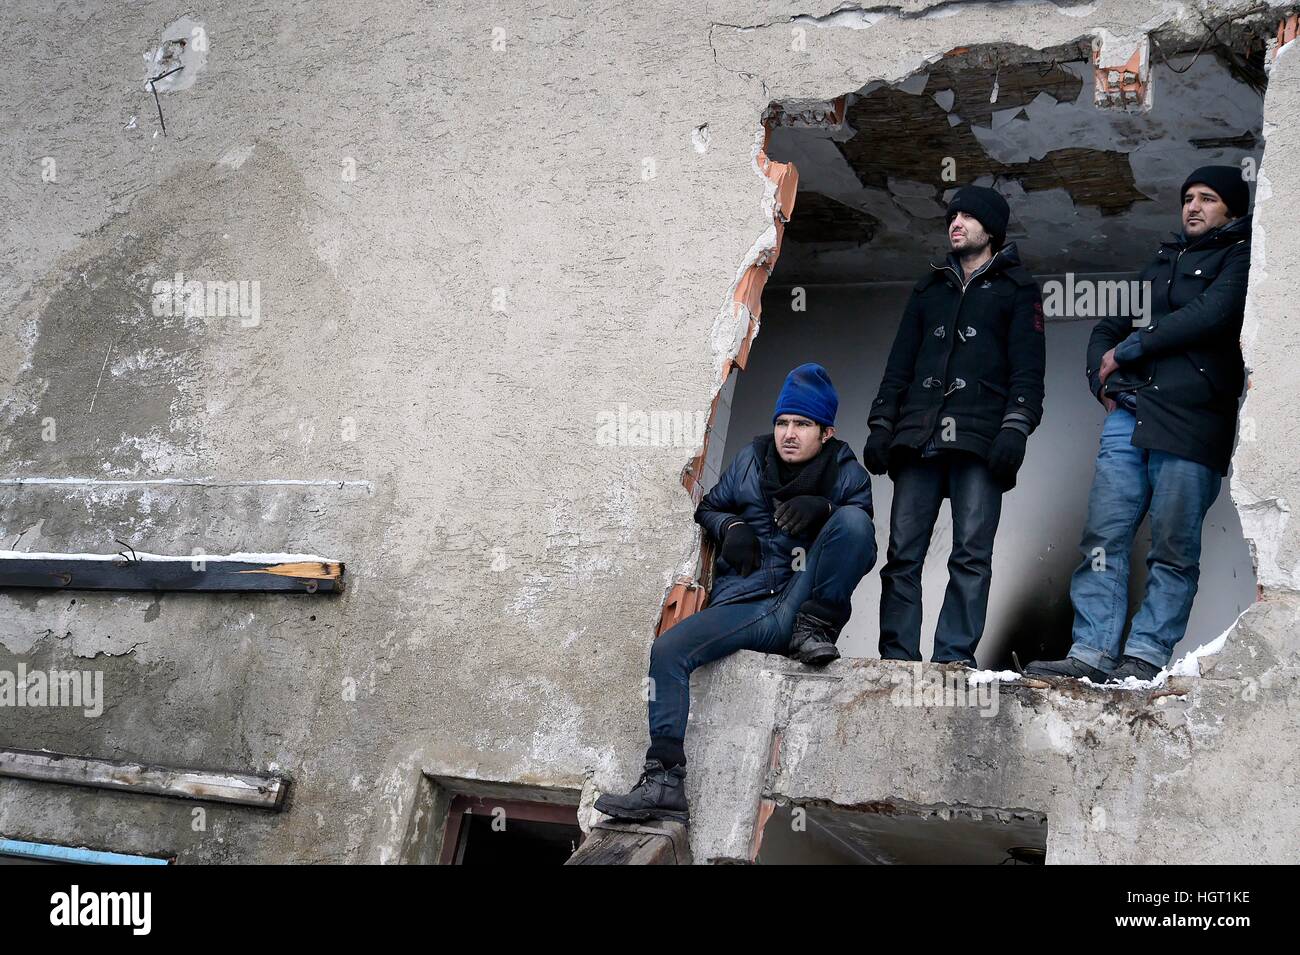 Europe, Serbia, Belgrade, 12 January 2017 : Thousands of Afghan migrants are stuck in the Serbian capital, living in abandoned warehouses, in inhuman conditions with temperatures that reach -15 degrees. Afghan migrants are waiting for months the possibility of opening of the Hungarian border of Serbia in order to access in Europe.    Photo © Danilo Balducci/Sintesi/Alamy Live News Stock Photo